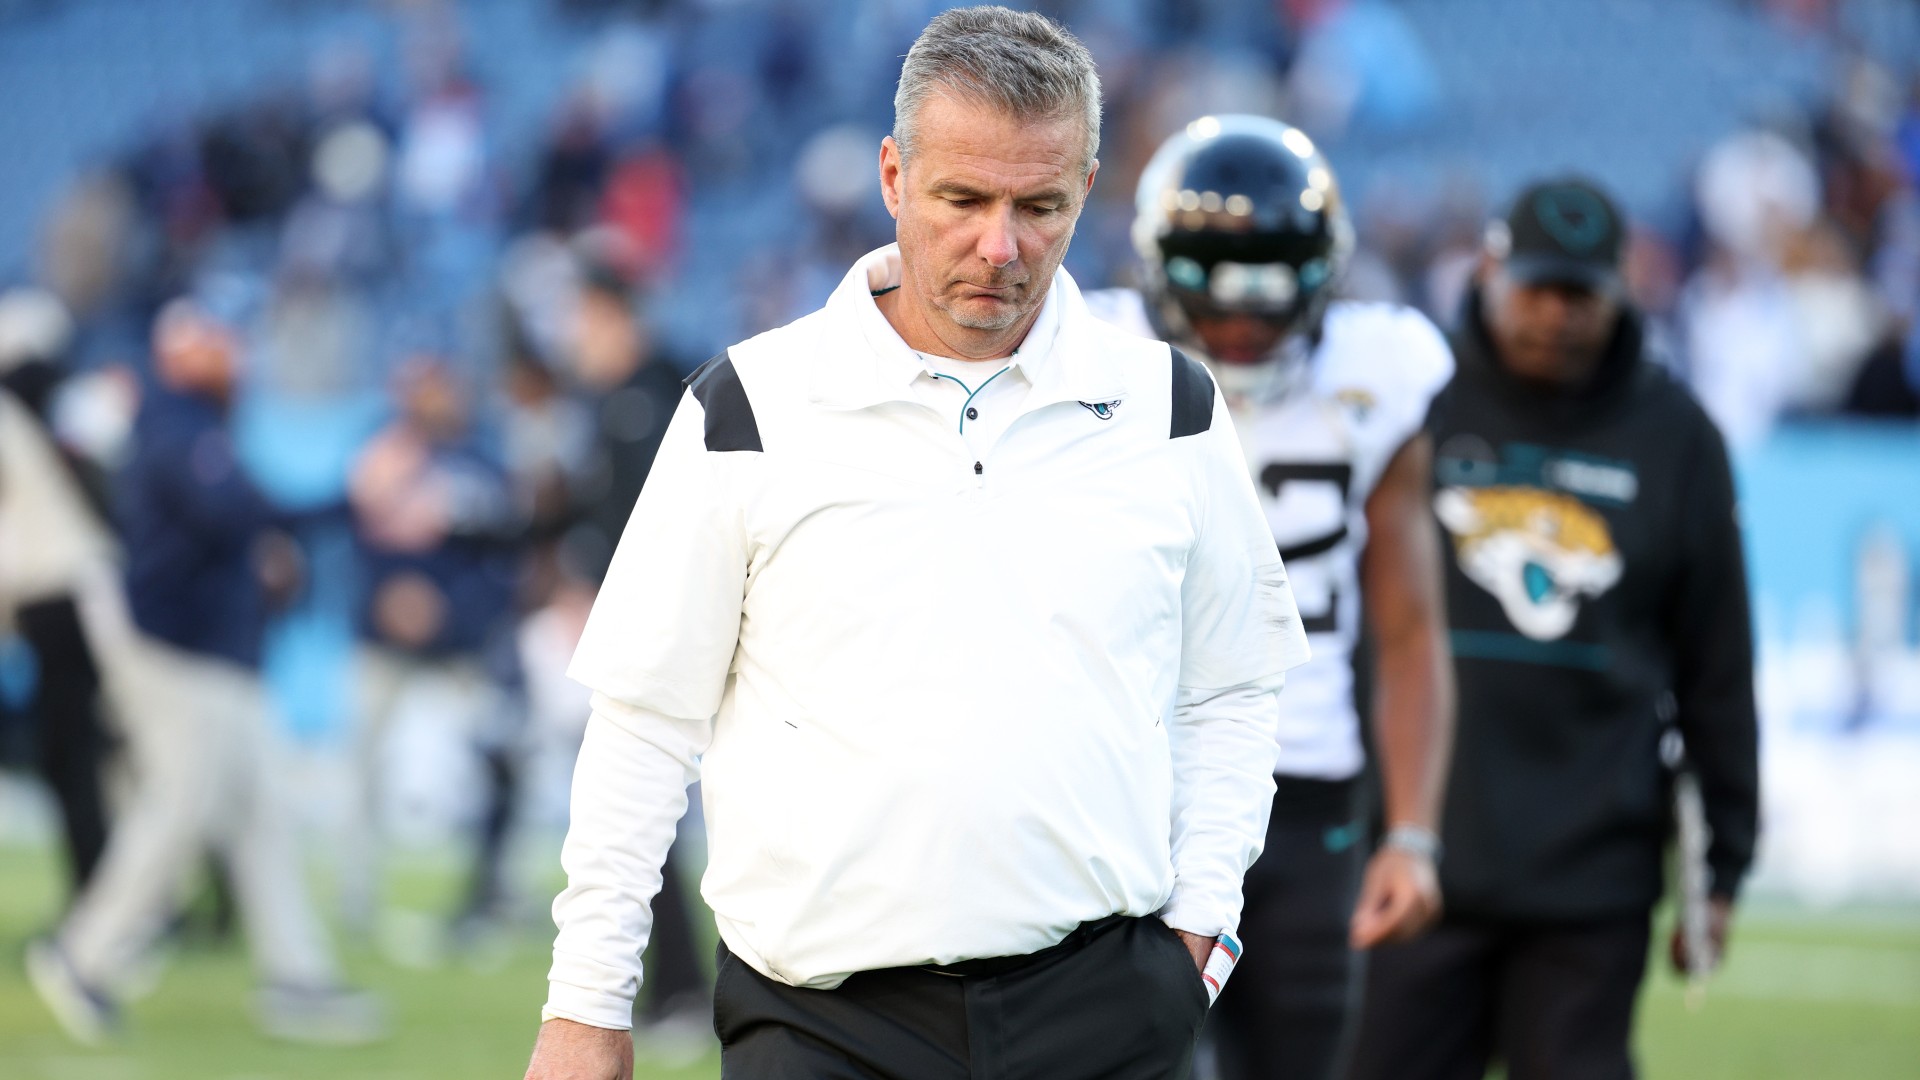 Why did the Jaguars fire Urban Meyer? Bar video, Josh Lambo allegations end NFL stint after 13 games